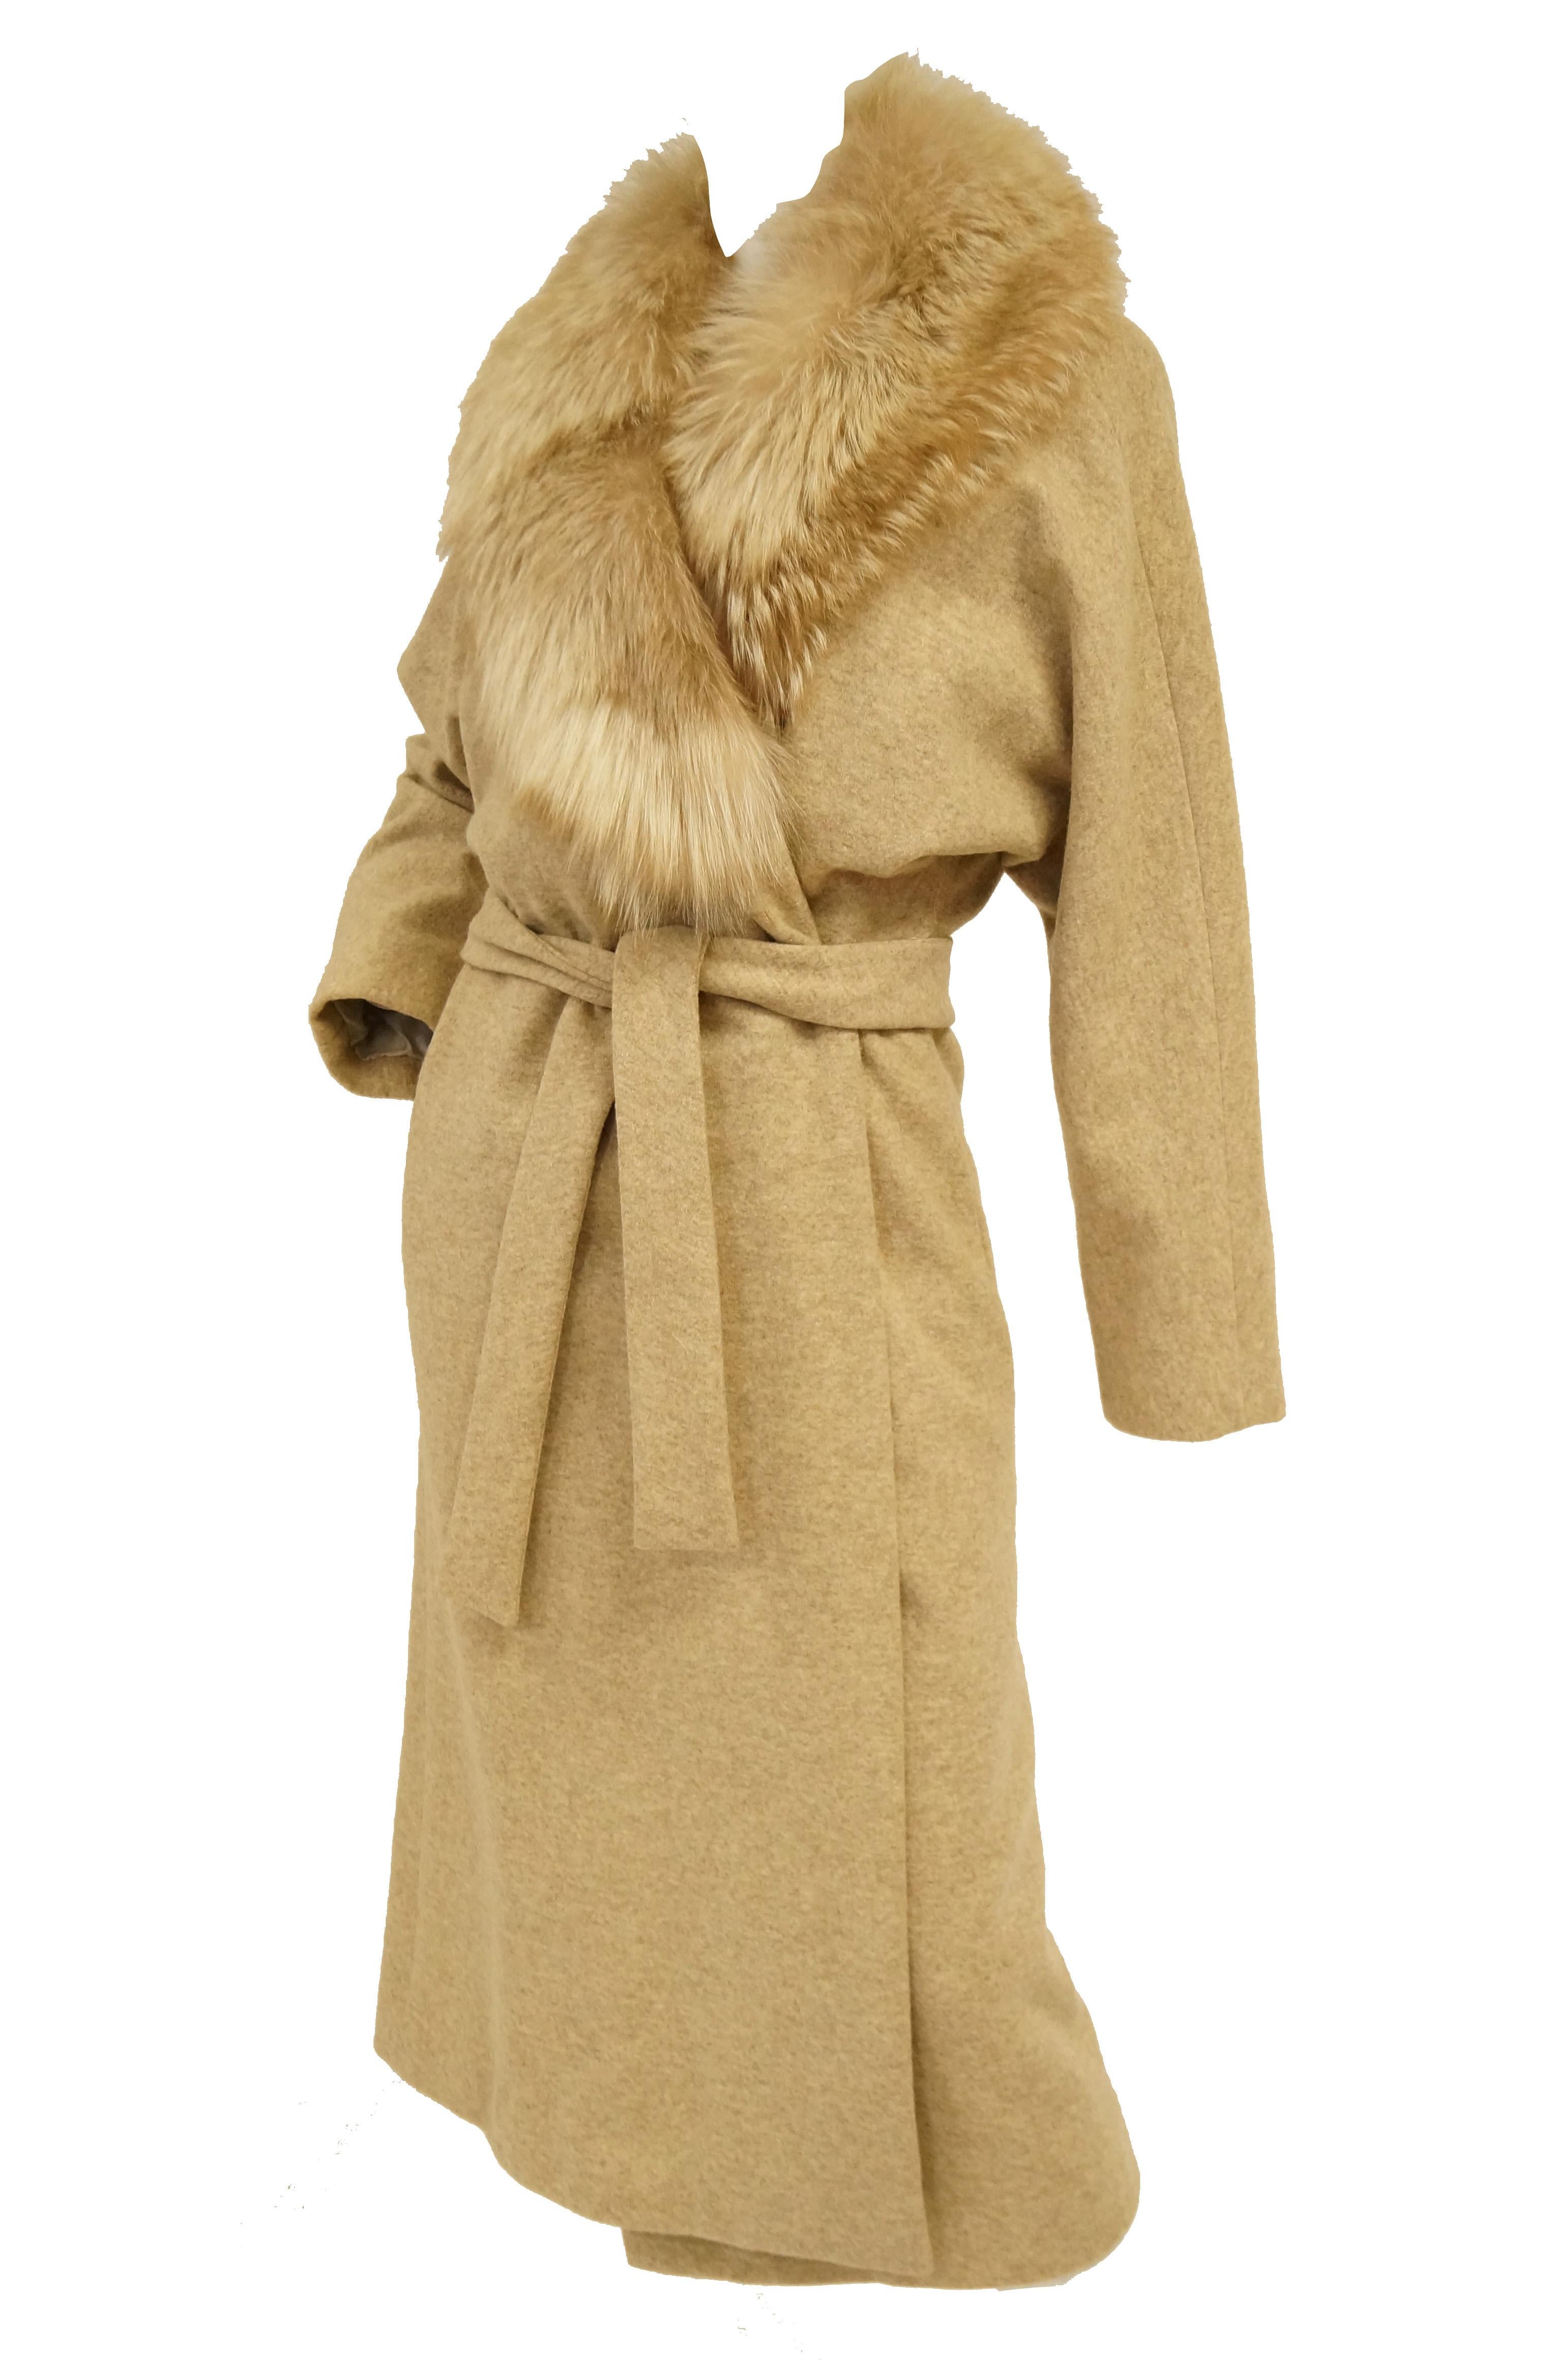 Amazing camel beige wool coat by Bill Blass! The coat is midi length, with long sleeves, a luxurious fox fur shawl collar, and a wrap style closure with matching wool belt. The fur collar is composed of plush golden fox and falls down to the waist